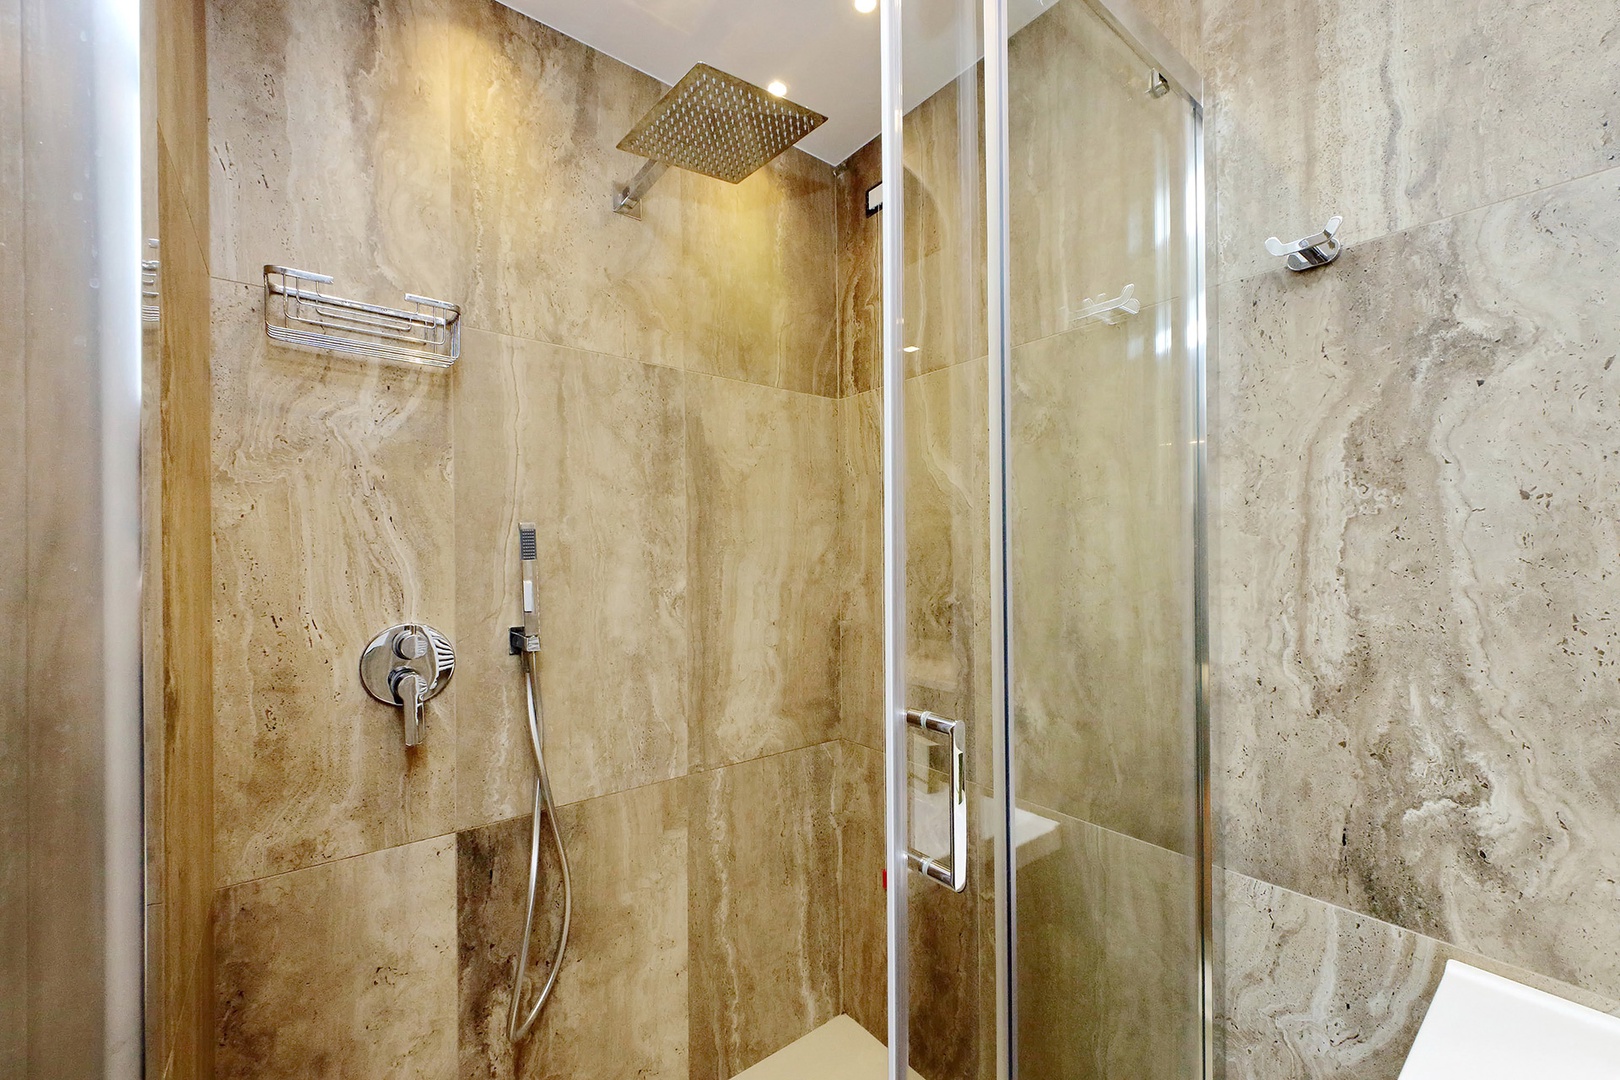 Shower with fixed and flexible showerheads